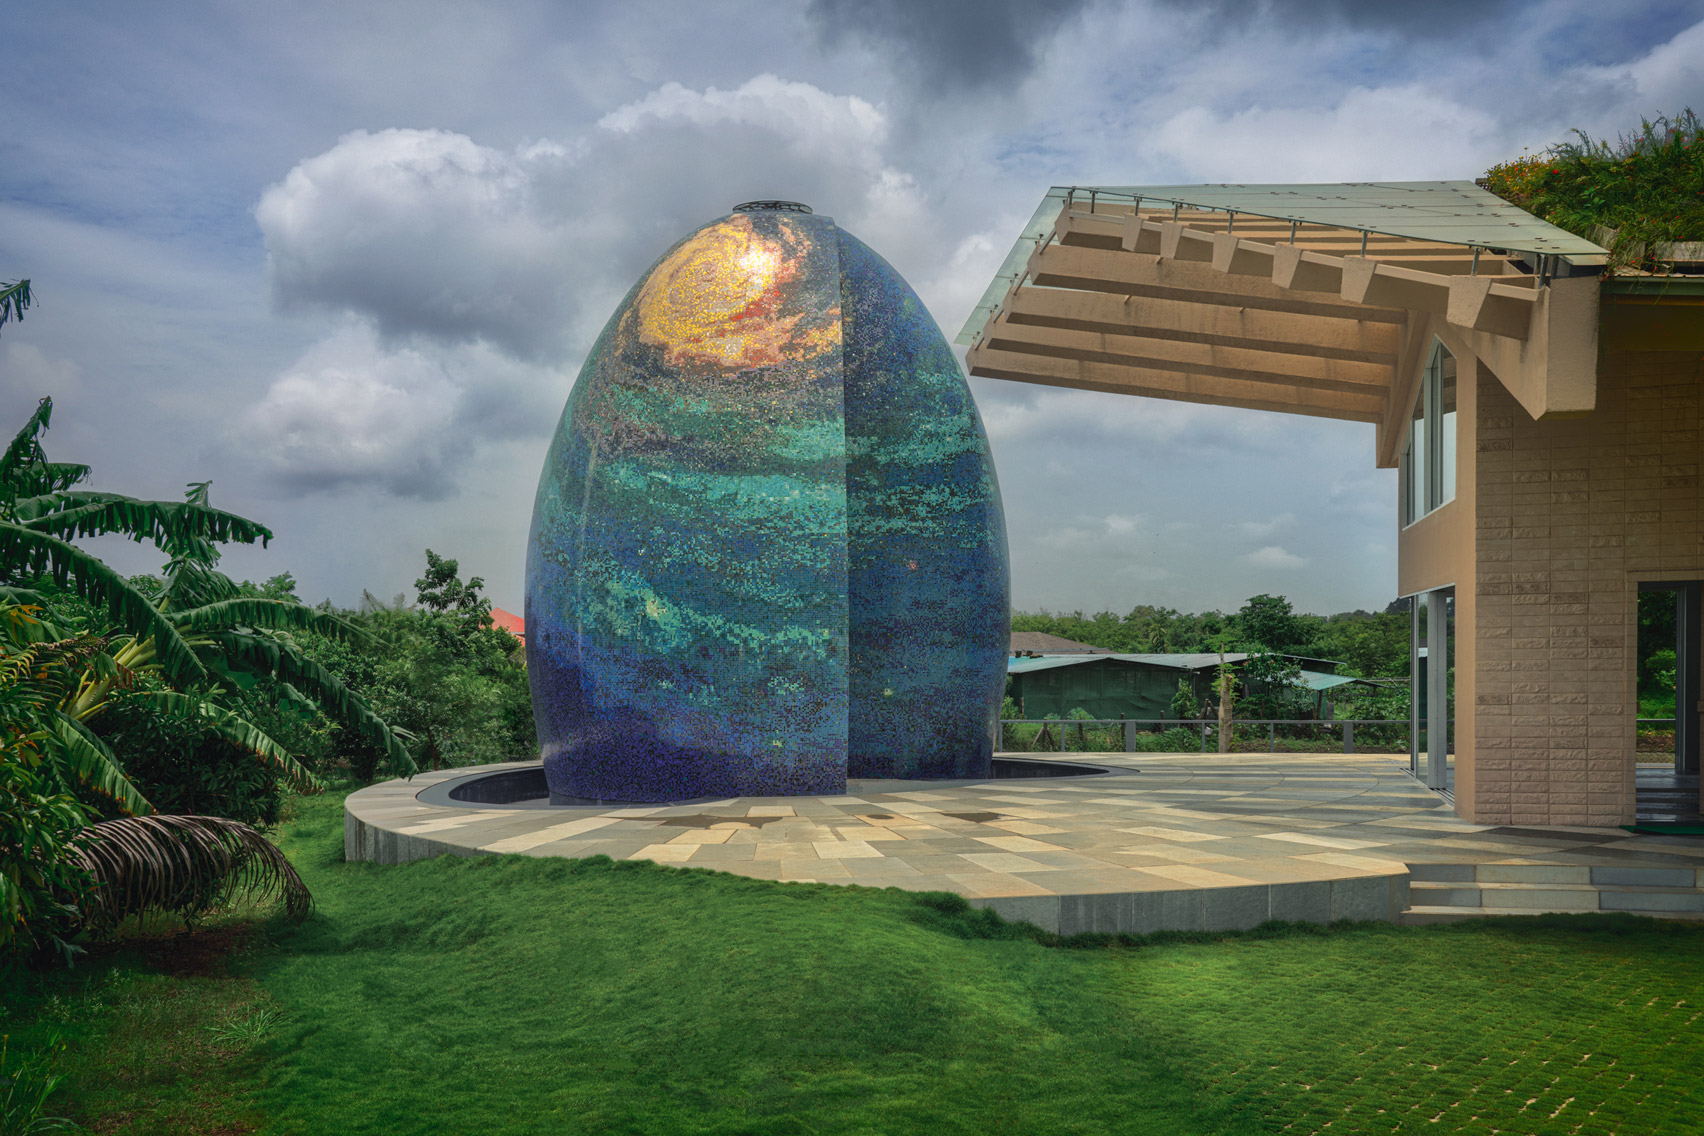 Shiny blue egg-shape temple in a residential garden